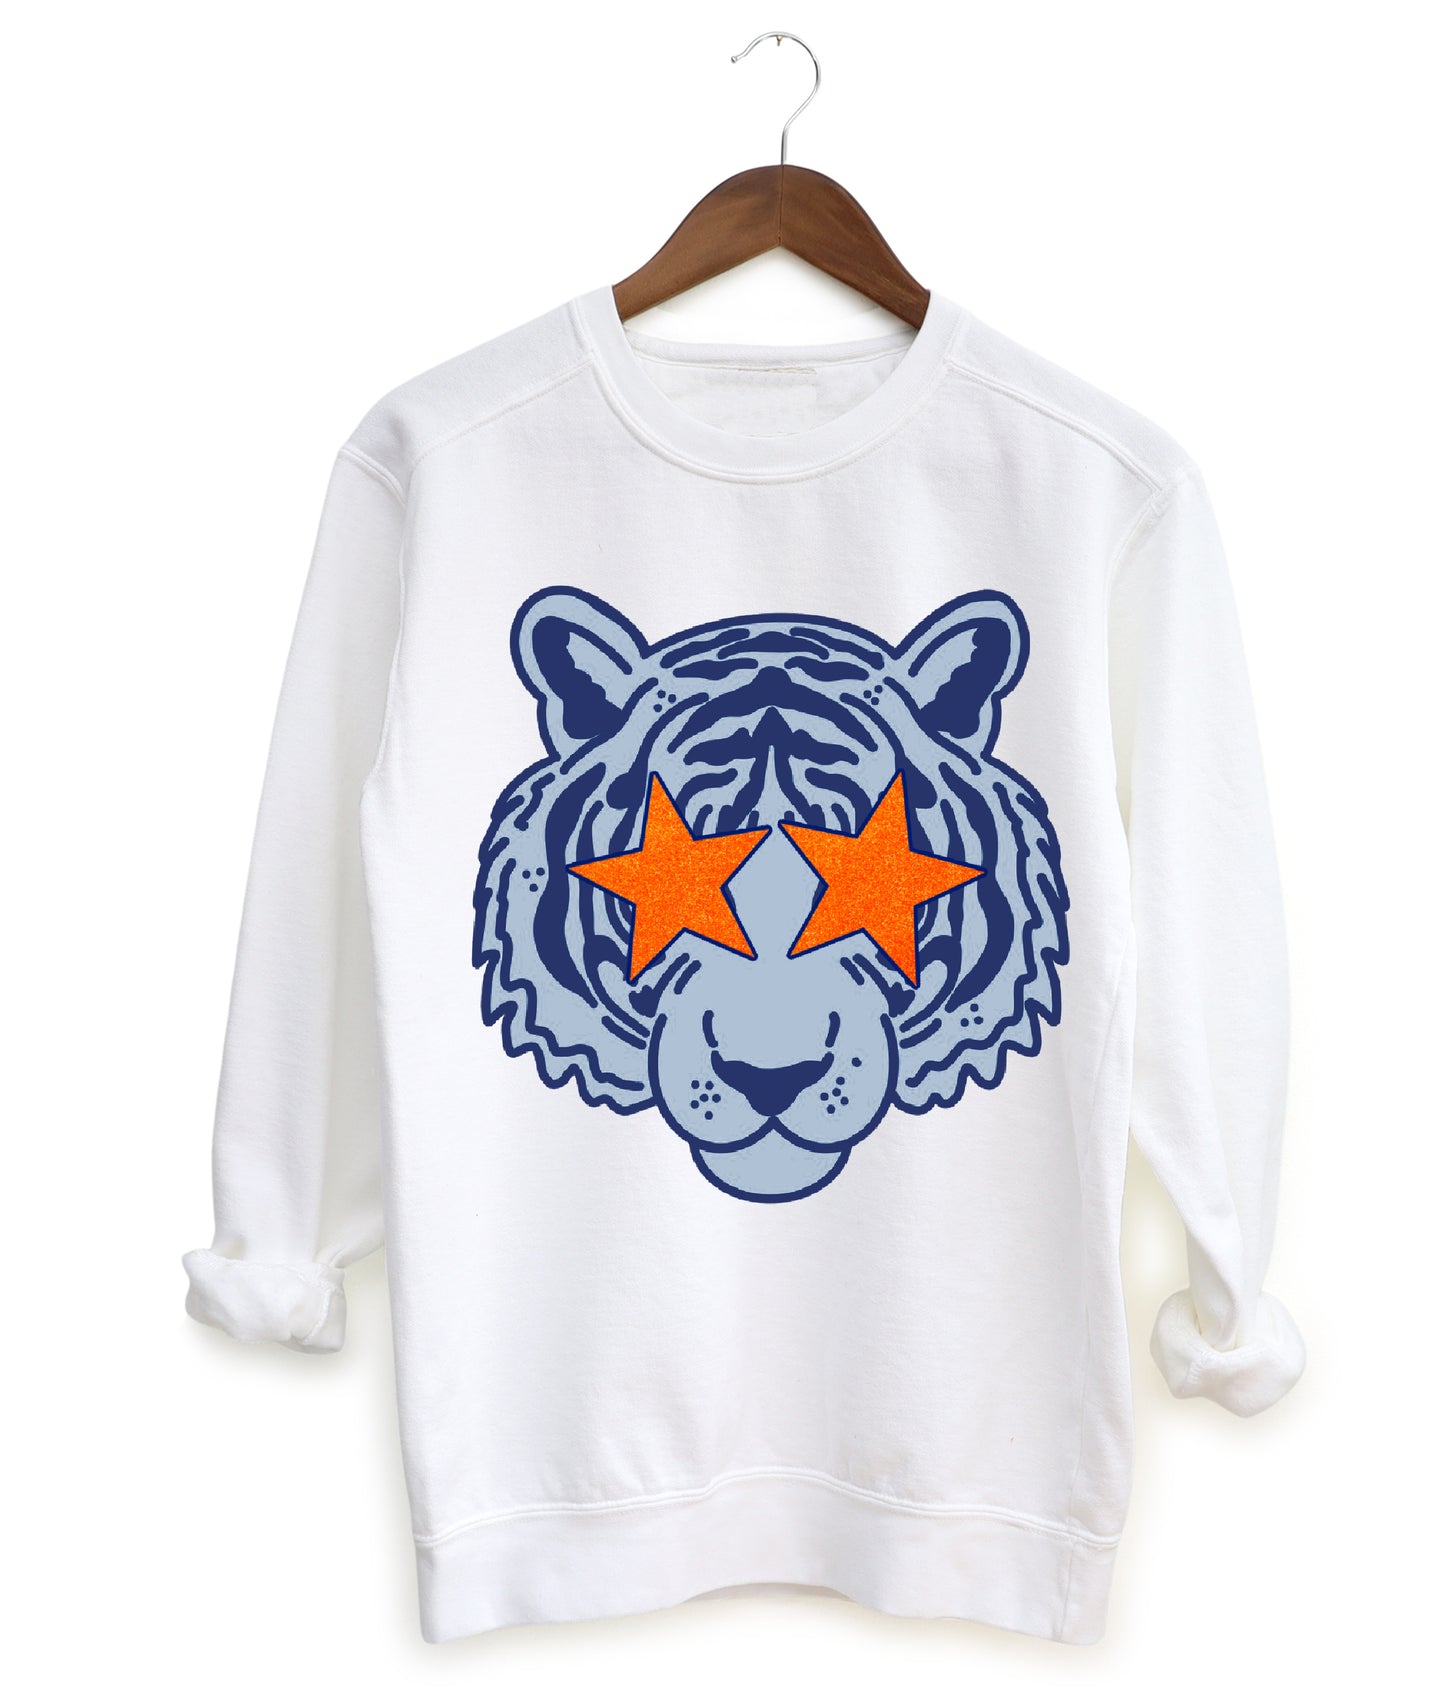 Gildan, Comfort Colors or Bella Canvas - Navy and Orange Tiger Sweatshirt / Youth and Adult Sizes